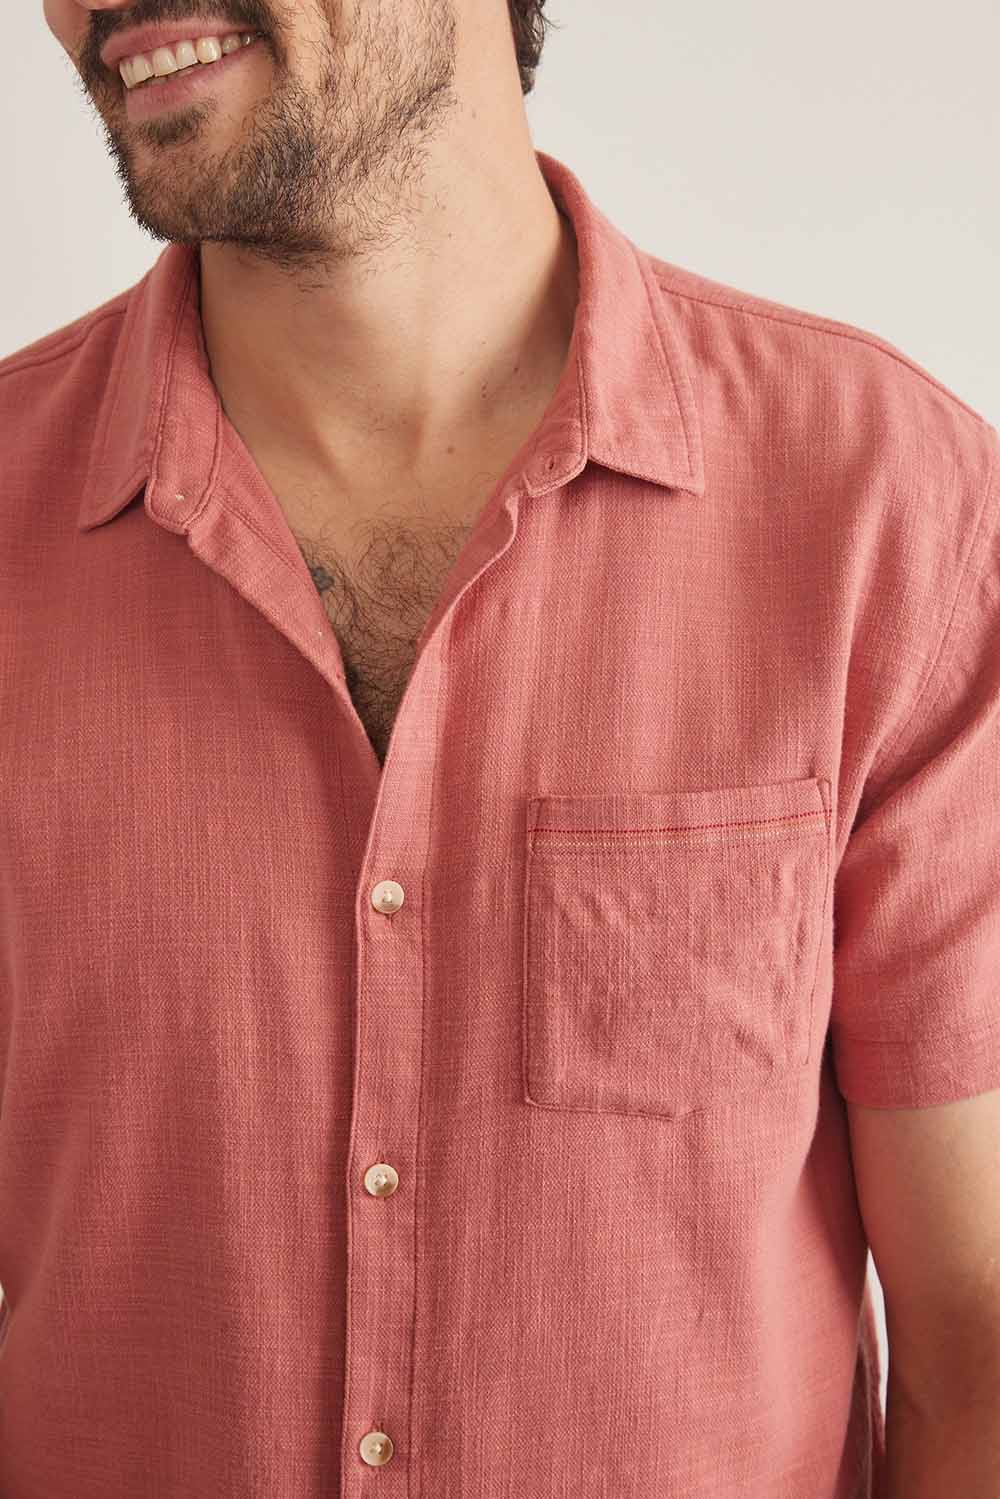 Marine Layer - Stretch Selvage Shirt - Rust - Detail